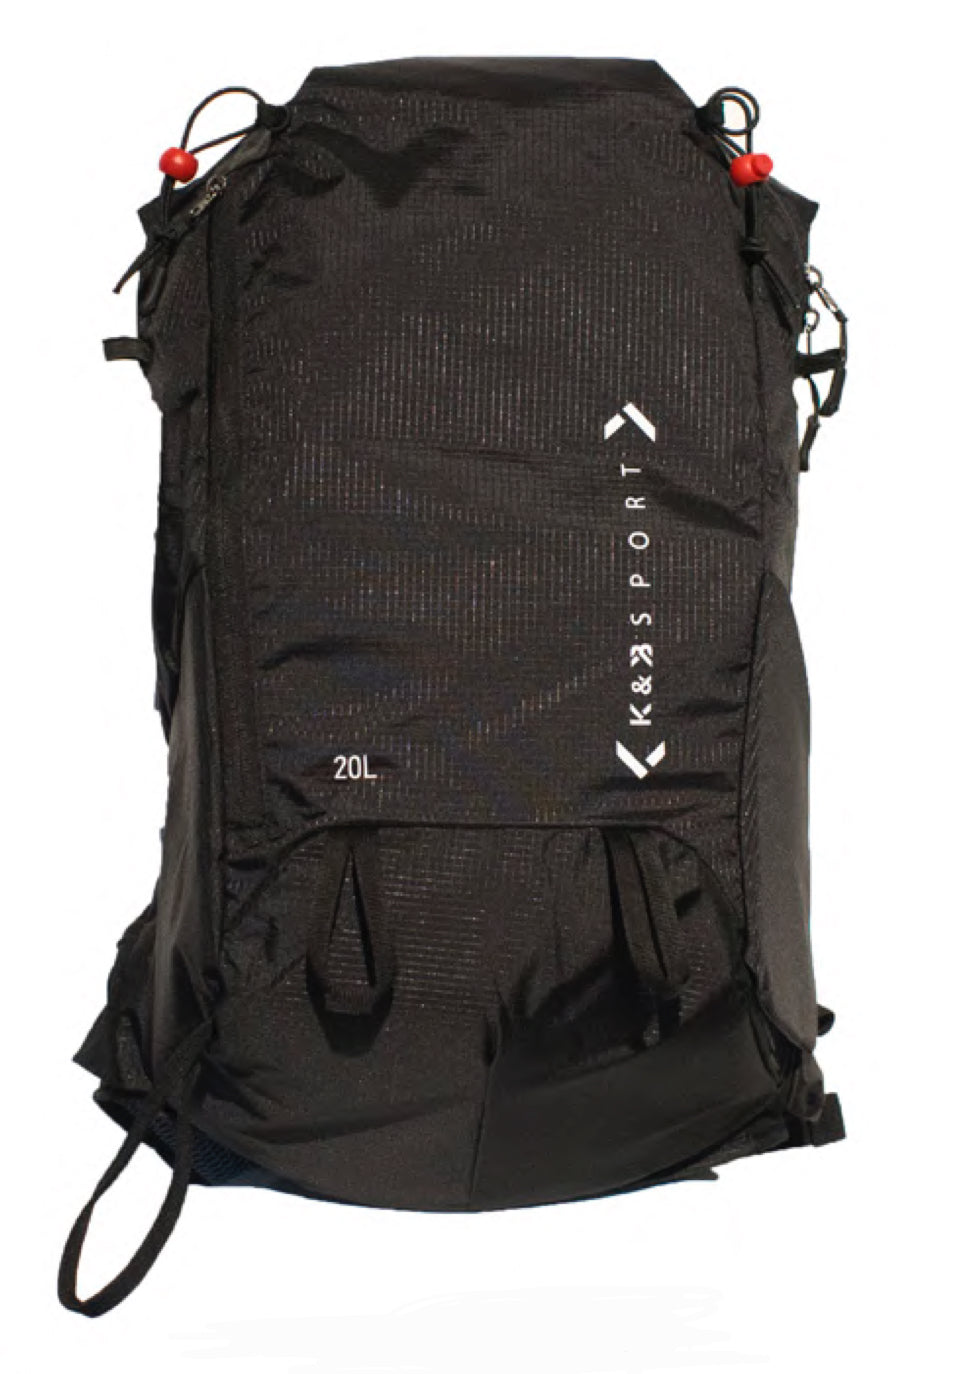 Approach Touring Ski Backpack